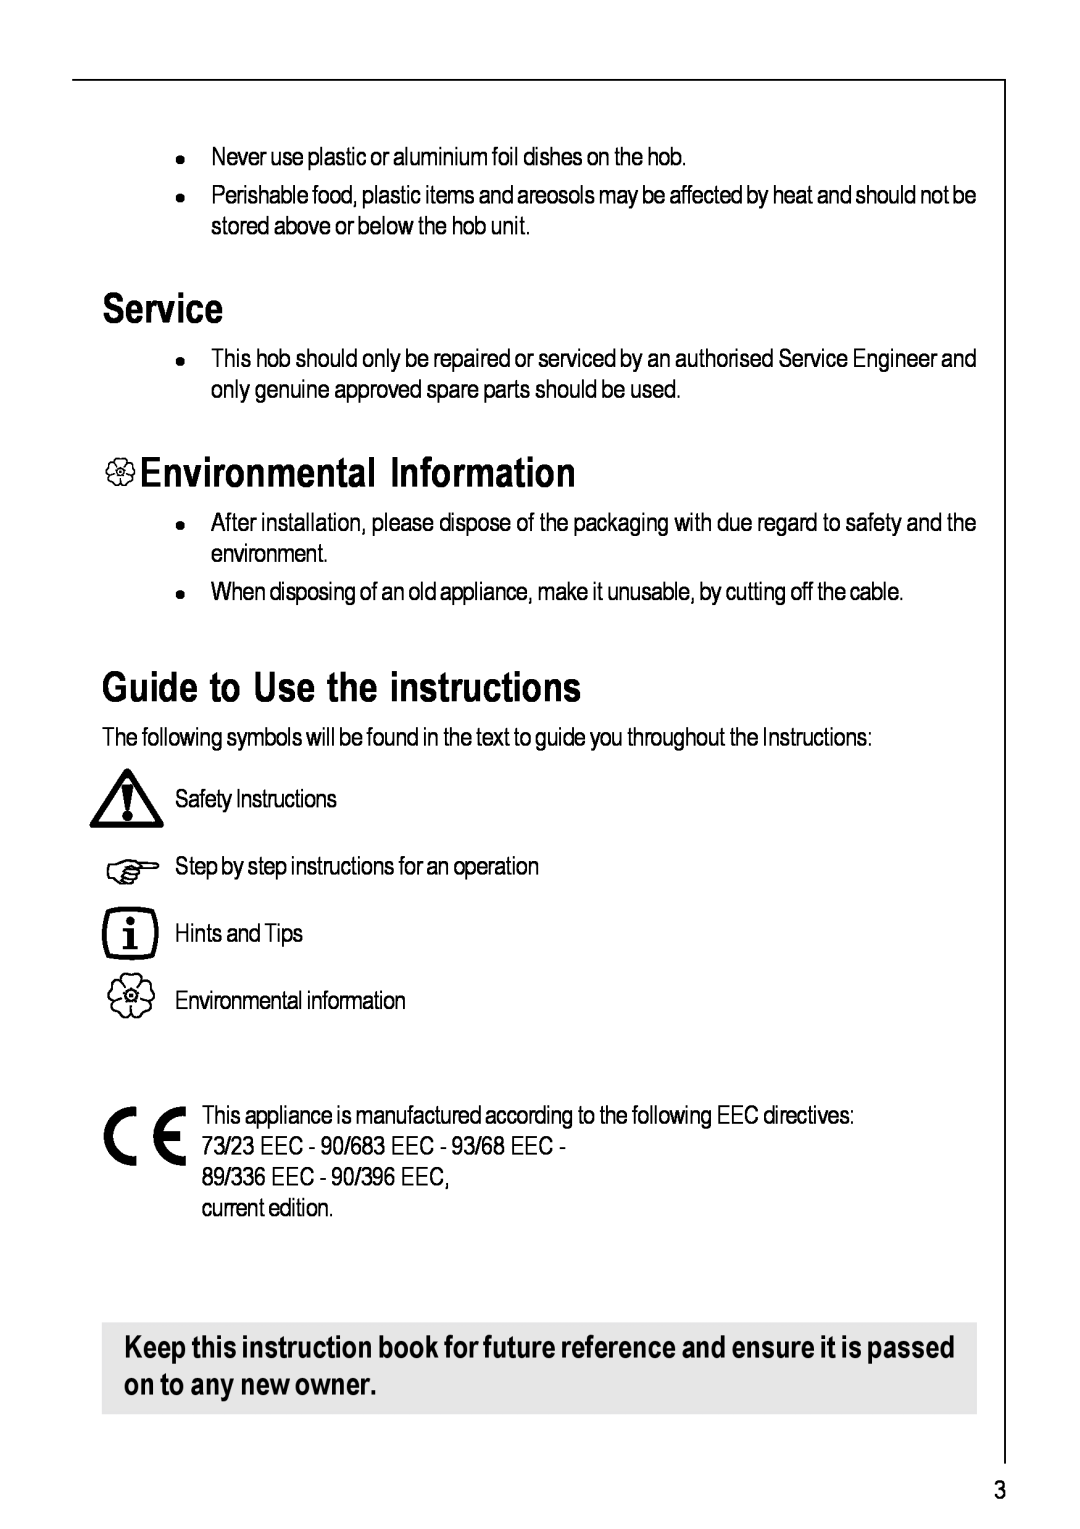 Electrolux 111 K operating instructions Service, Environmental Information, Guide to Use the instructions 